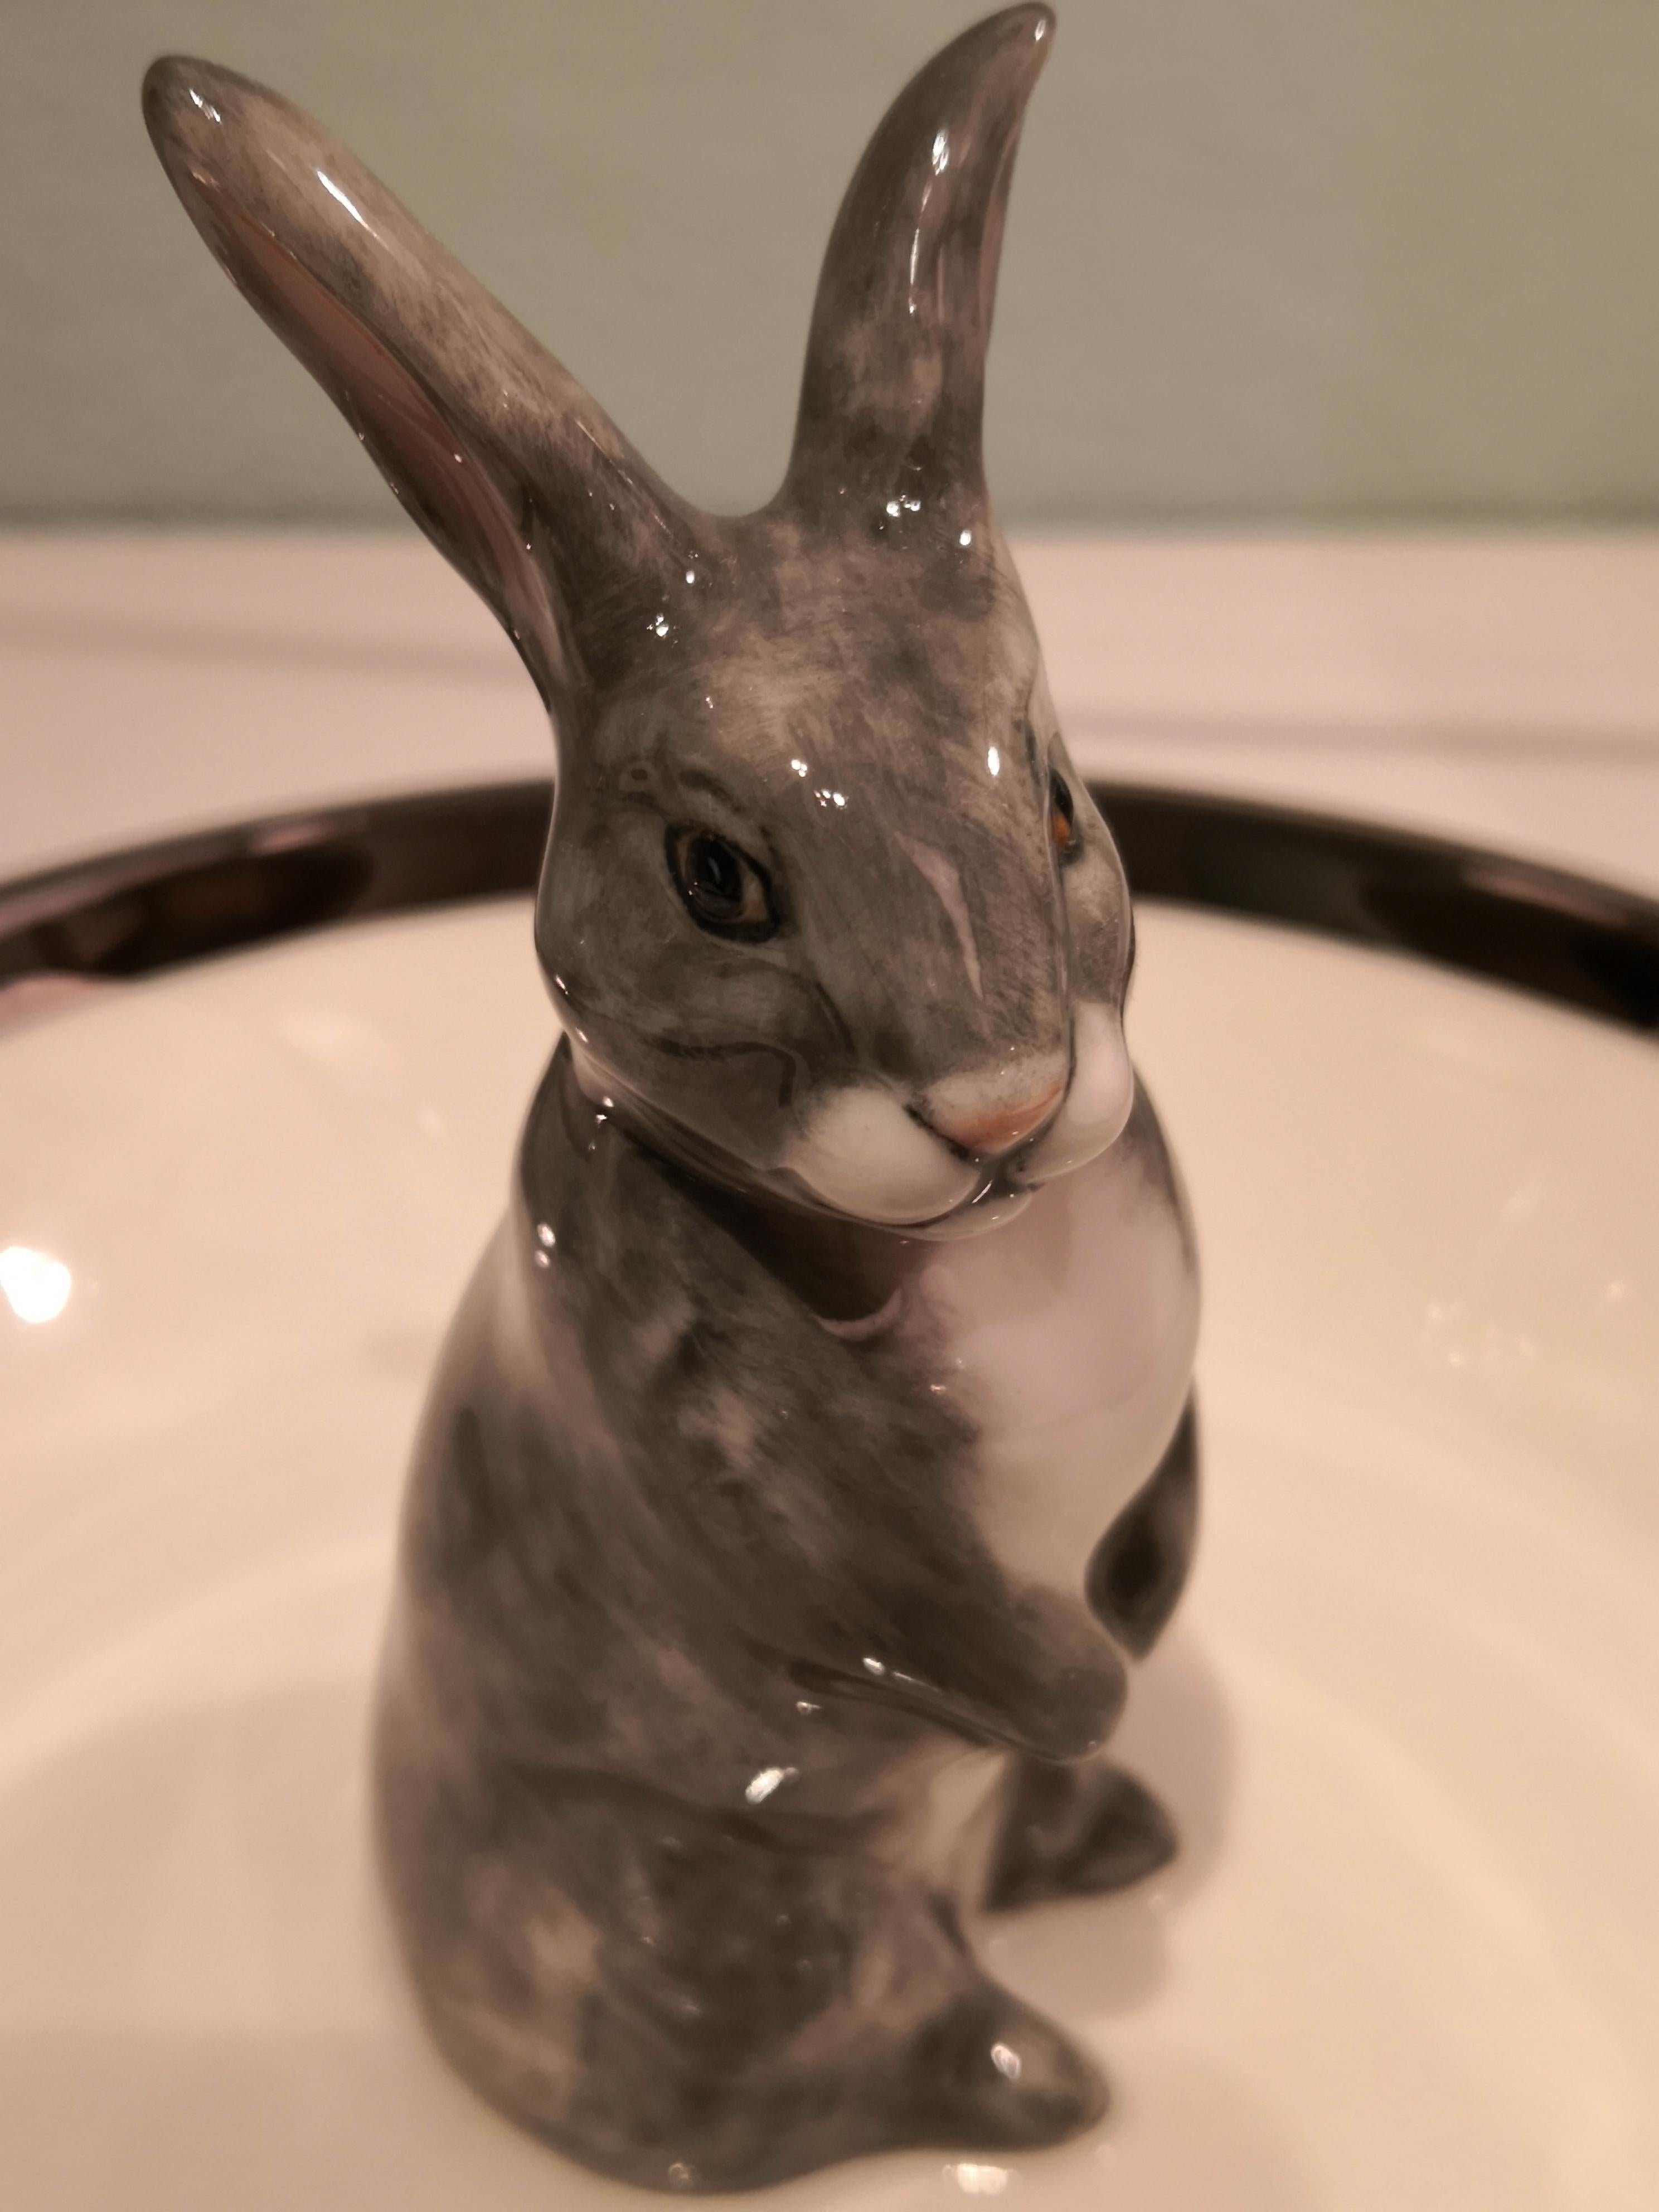 Completely handmade Easter porcelain bowl with a hands-free naturalistic painted Easter rabbit in grey and white colors. The rabbit is sitting in the middle of the bowl for decorating nuts or sweets around the figure. Rimmed with a fine platinum